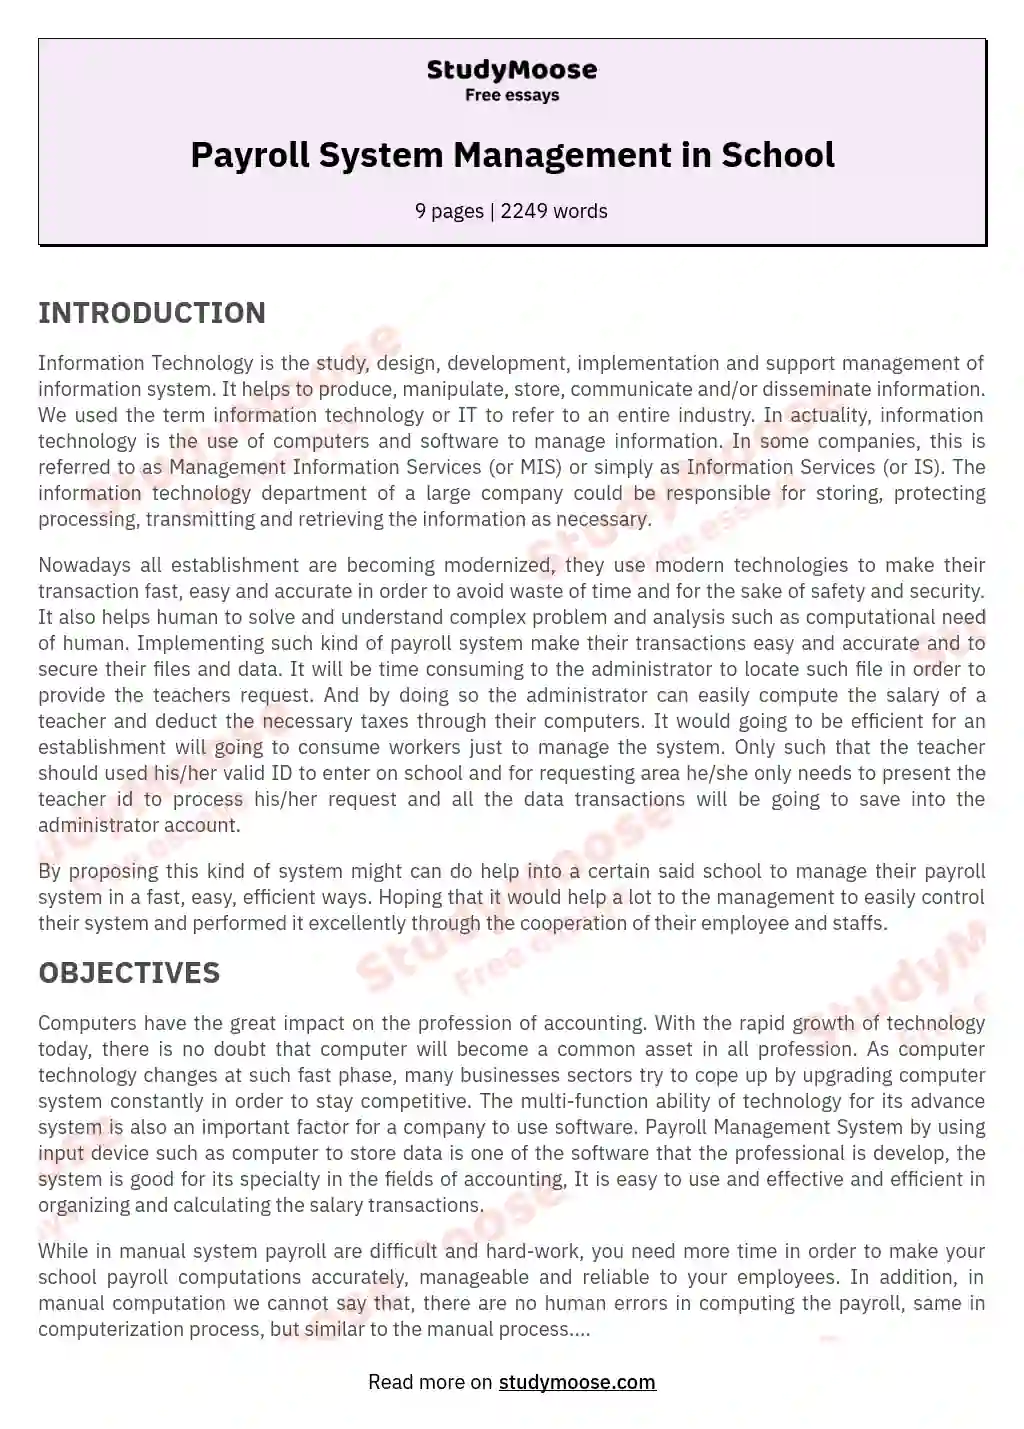 The Impact of Information Technology on Payroll Systems essay